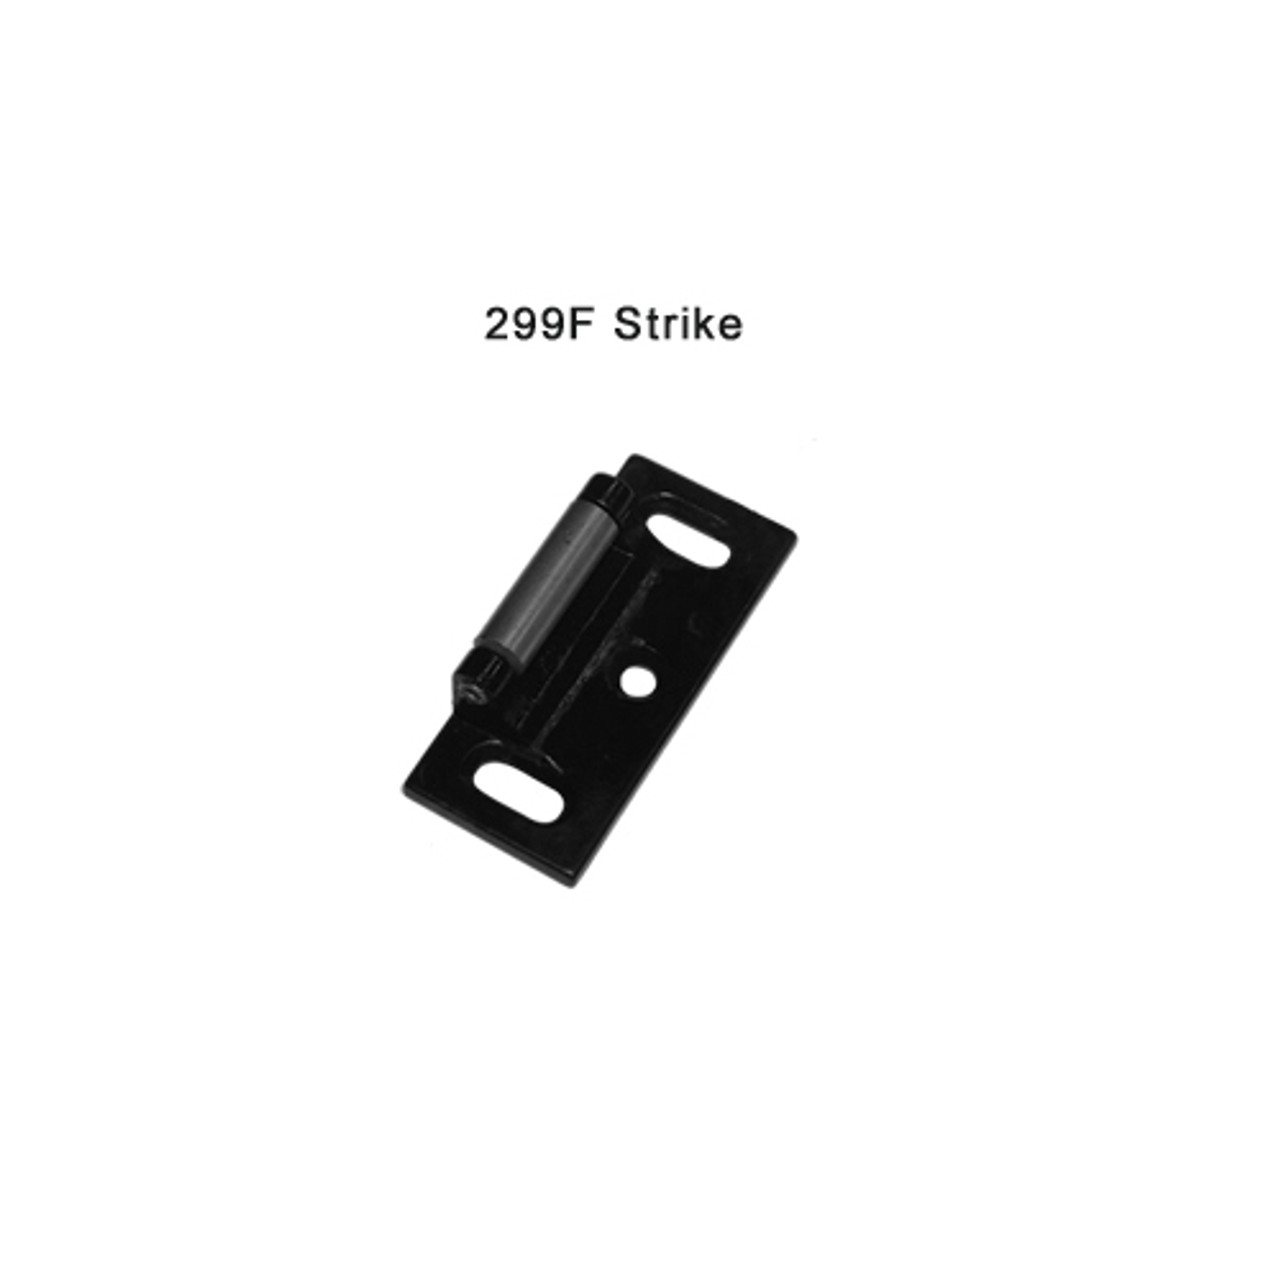 F-25-R-L-BE-DANE-US19-3-LHR Falcon 25 Series Fire Rated Rim Exit Device 510L-BE Dane Lever Trim with Blank Escutcheon in Flat Black Painted